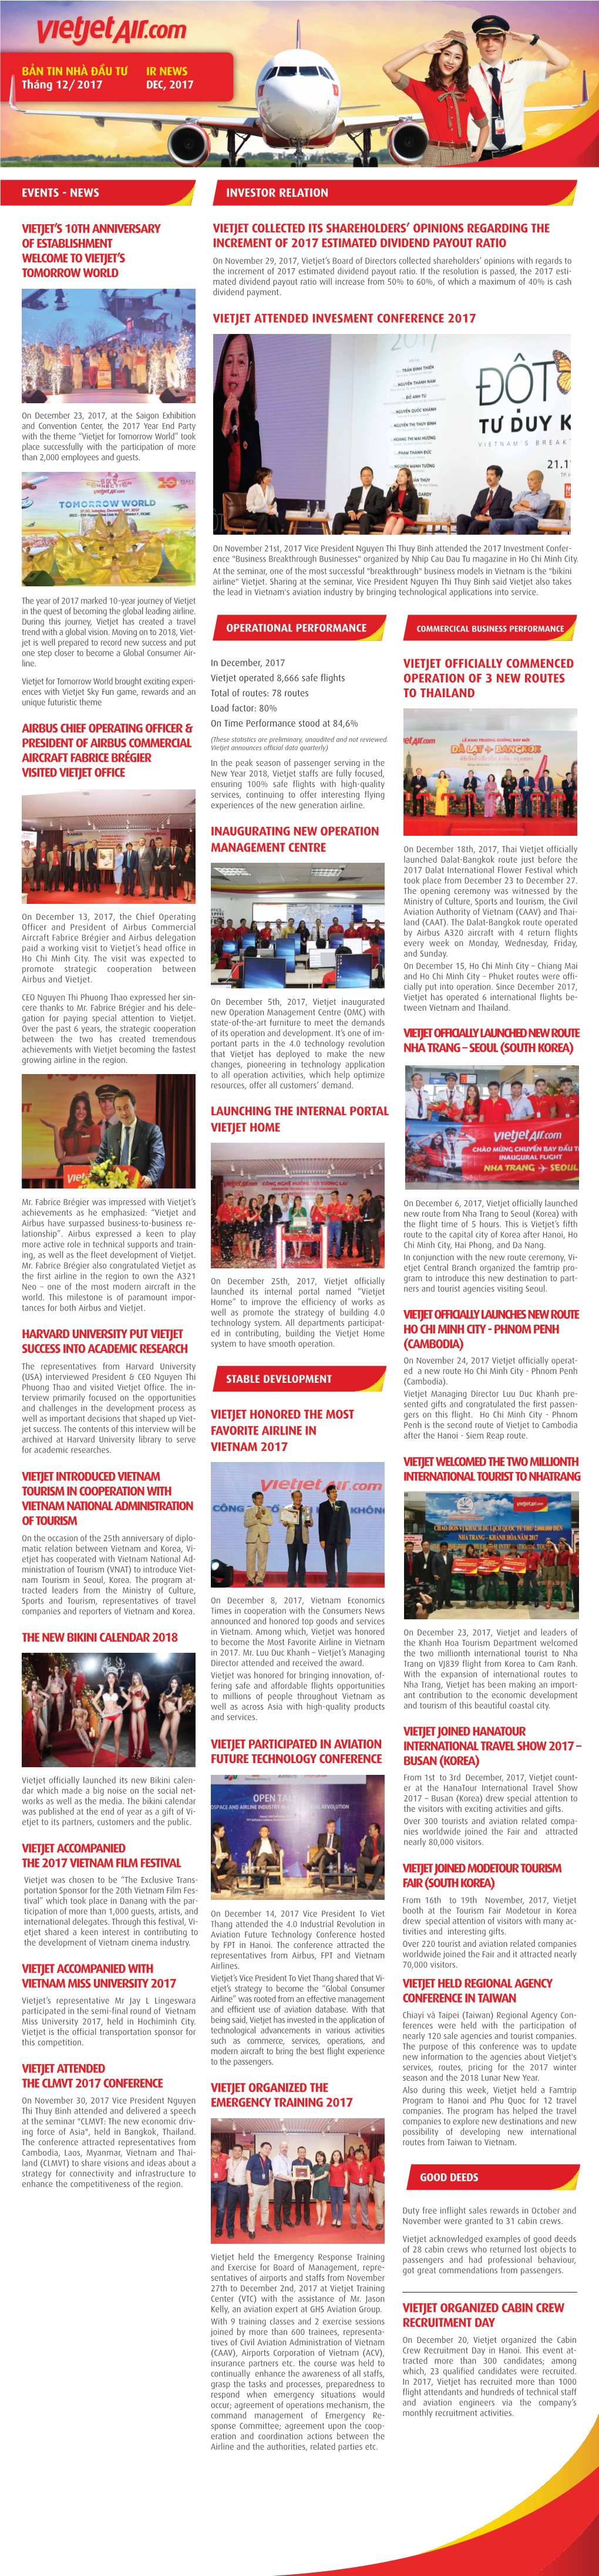 Vietjet Honored the Most Favorite Airline in Vietnam 2017